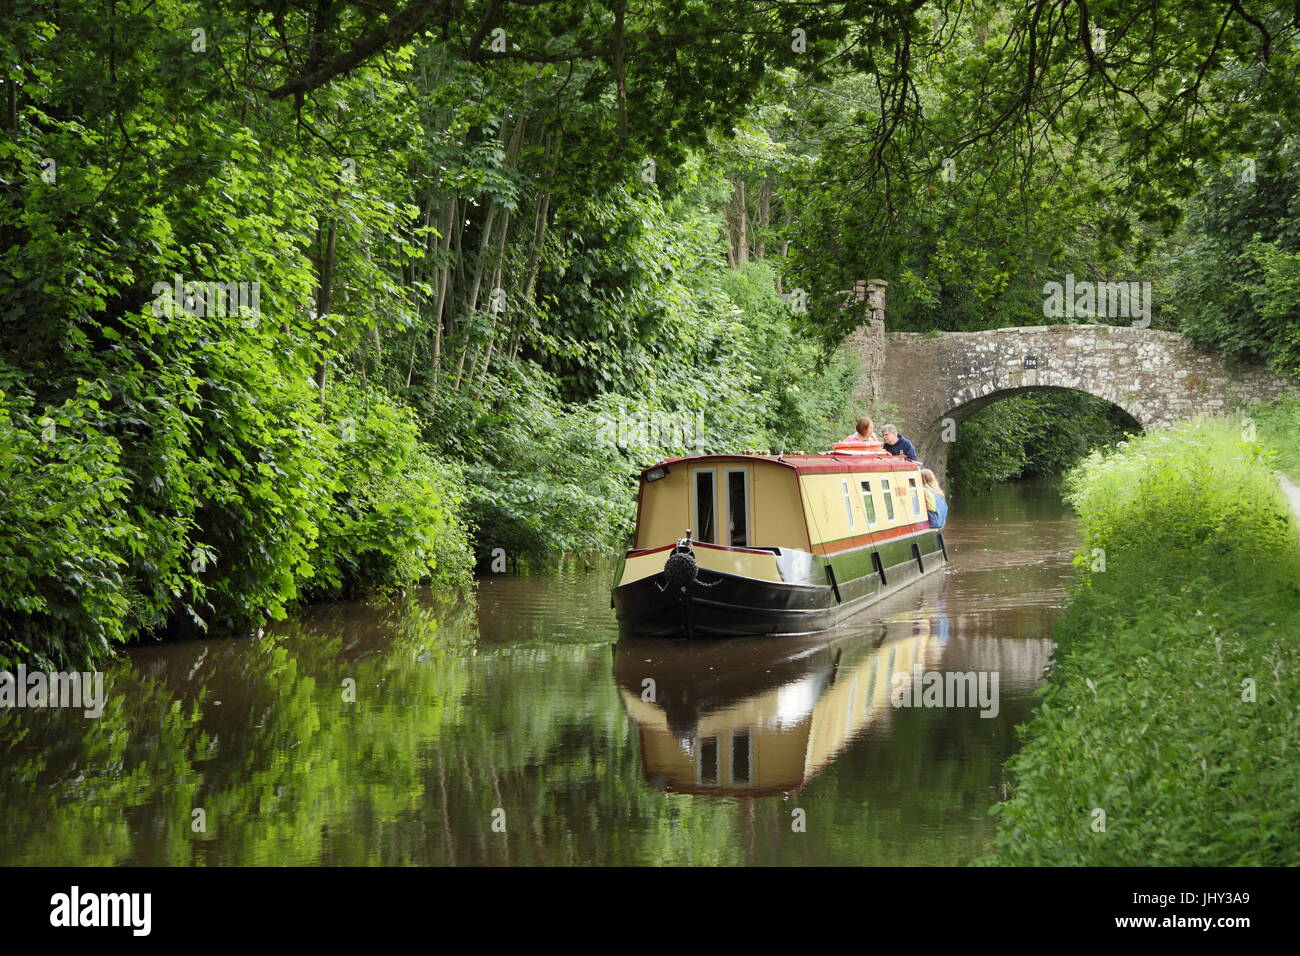 Narrowboat holiday makers navigate the Monmounthshire and Brecon Canal near Llangynidr in the Brecon Beacons, Powys, South Wales, UK - summer Stock Photo